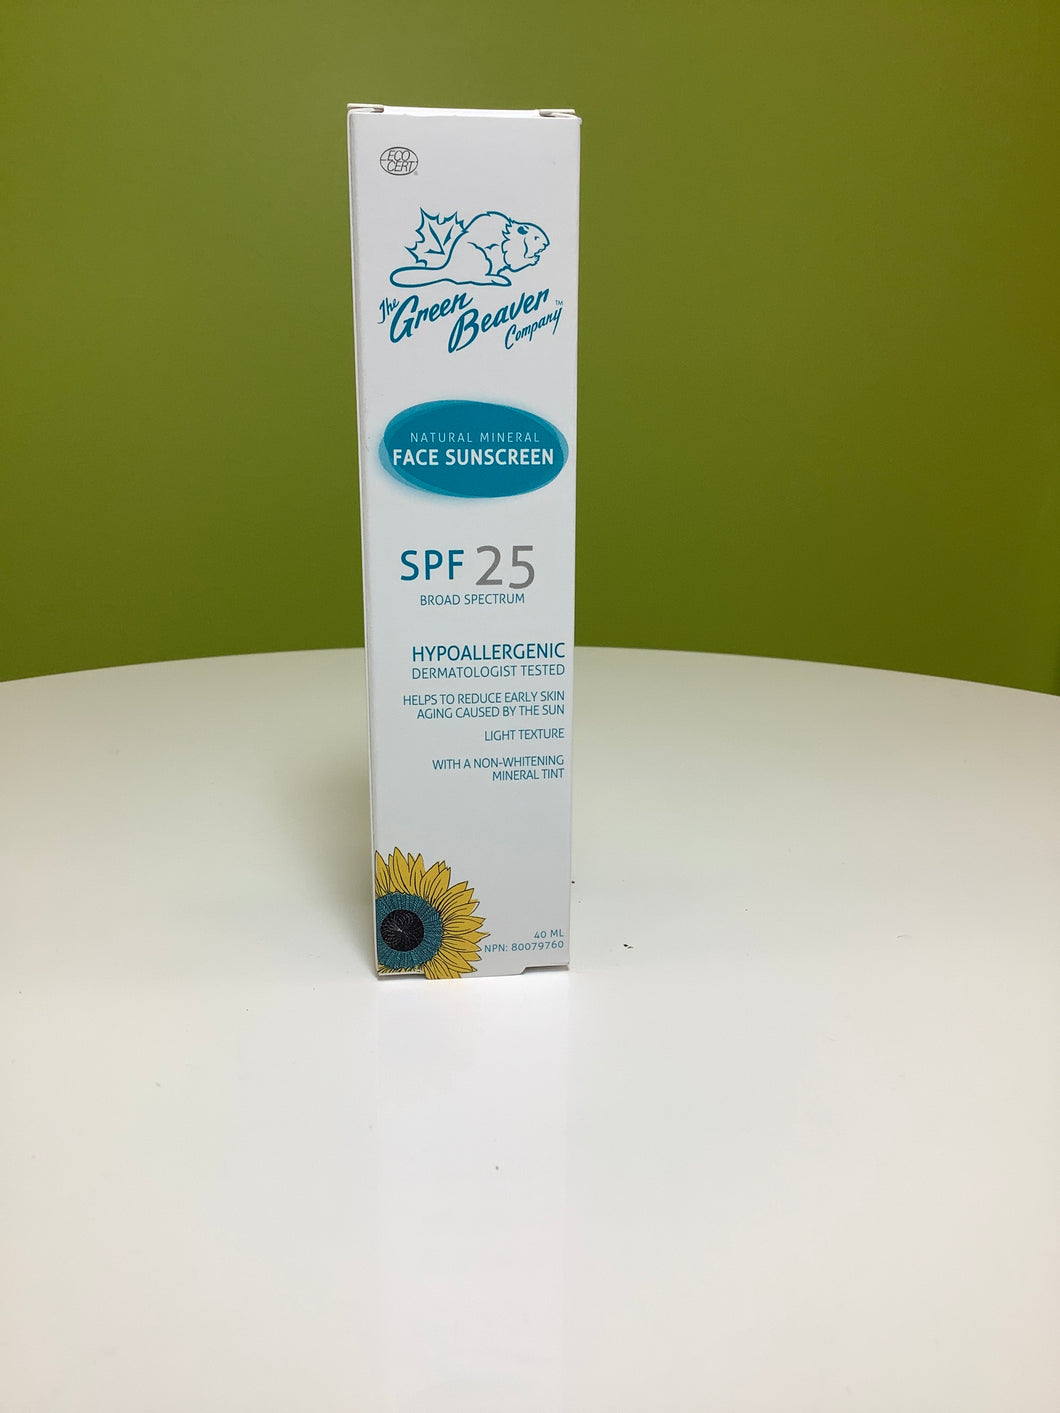 The Green Beaver Co. Natural Mineral Face Sunscreen SPF 25